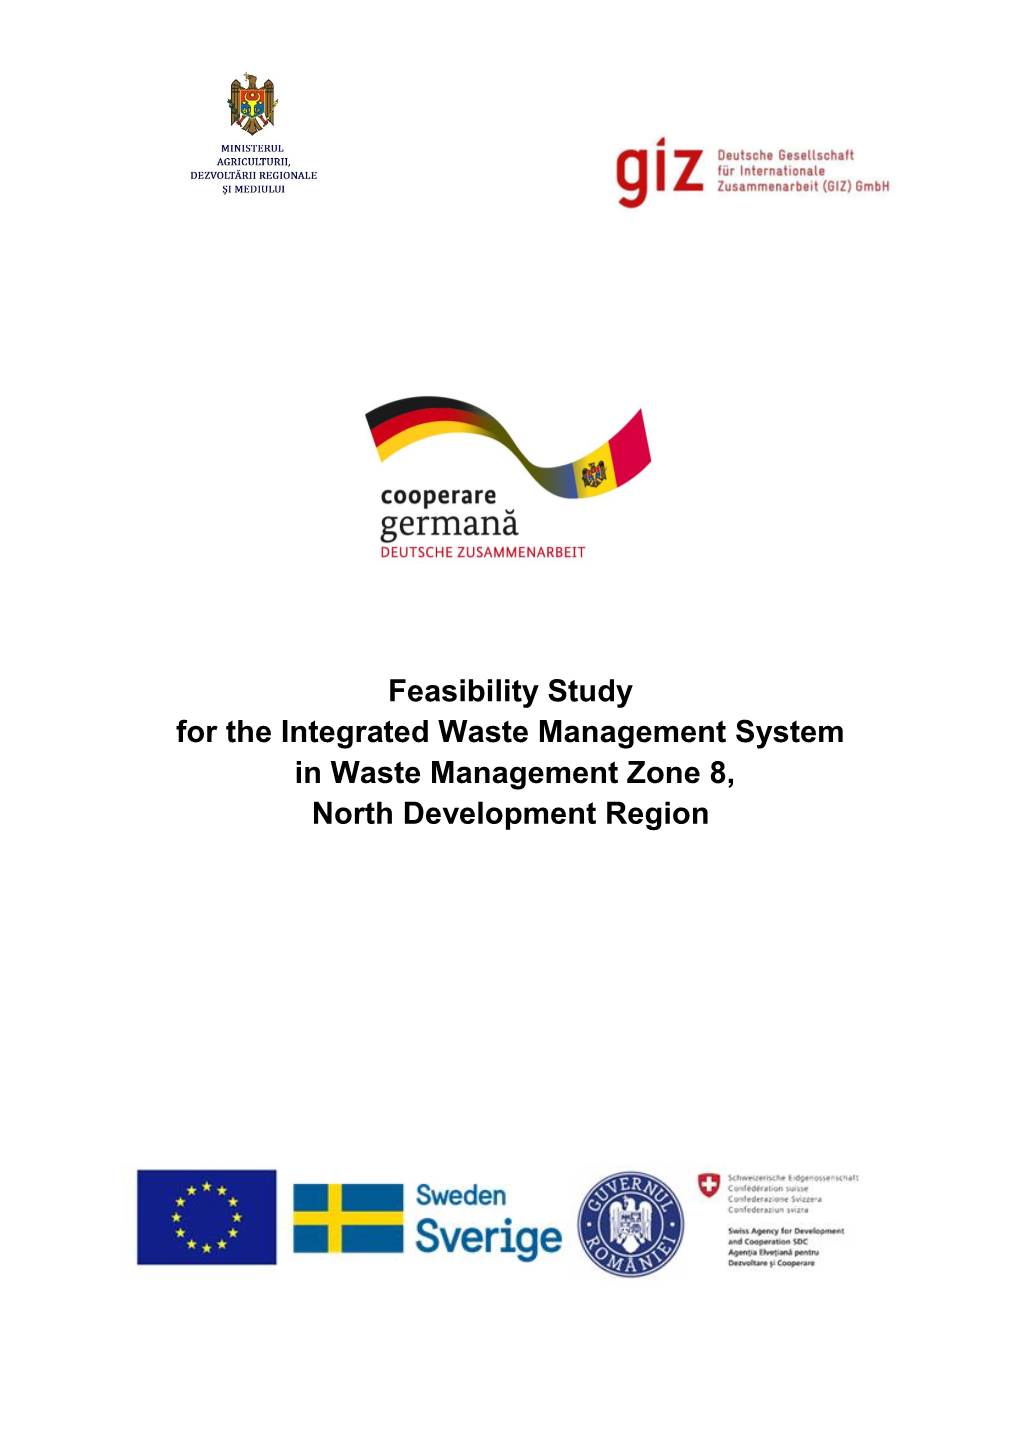 Feasibility Study for the Integrated Waste Management System in Waste Management Zone 8, North Development Region